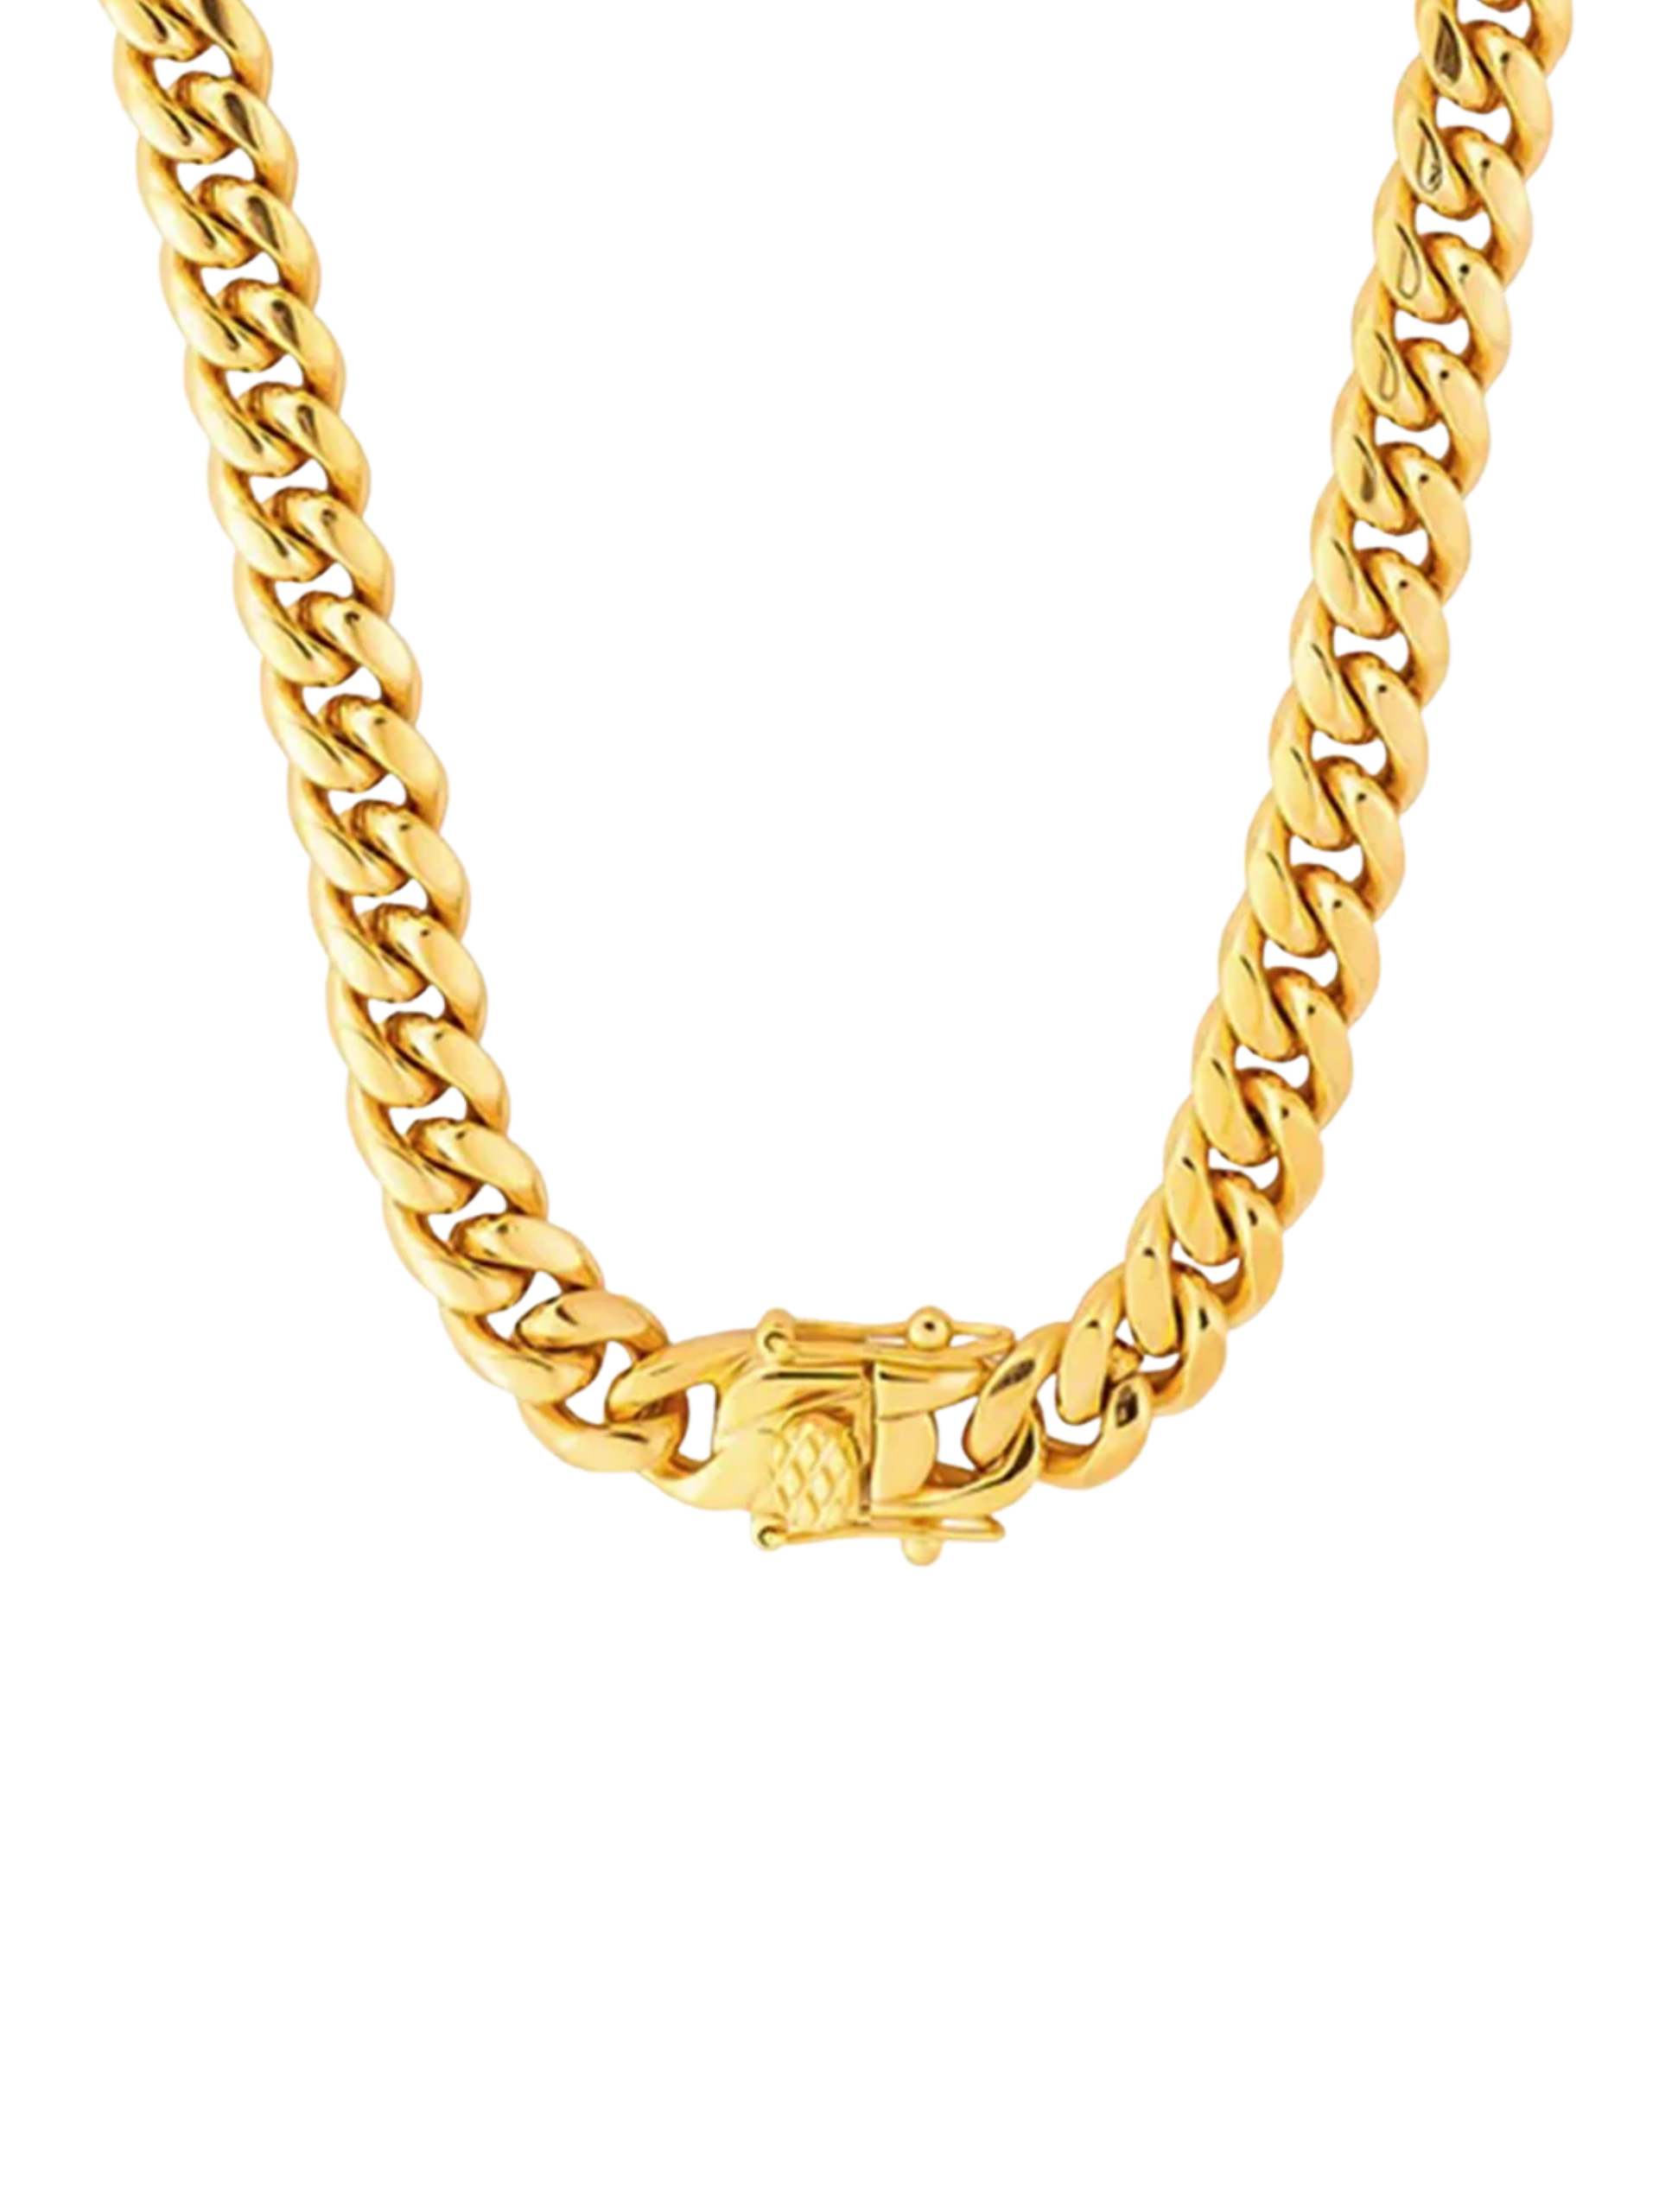 Xl isobel necklace - gold